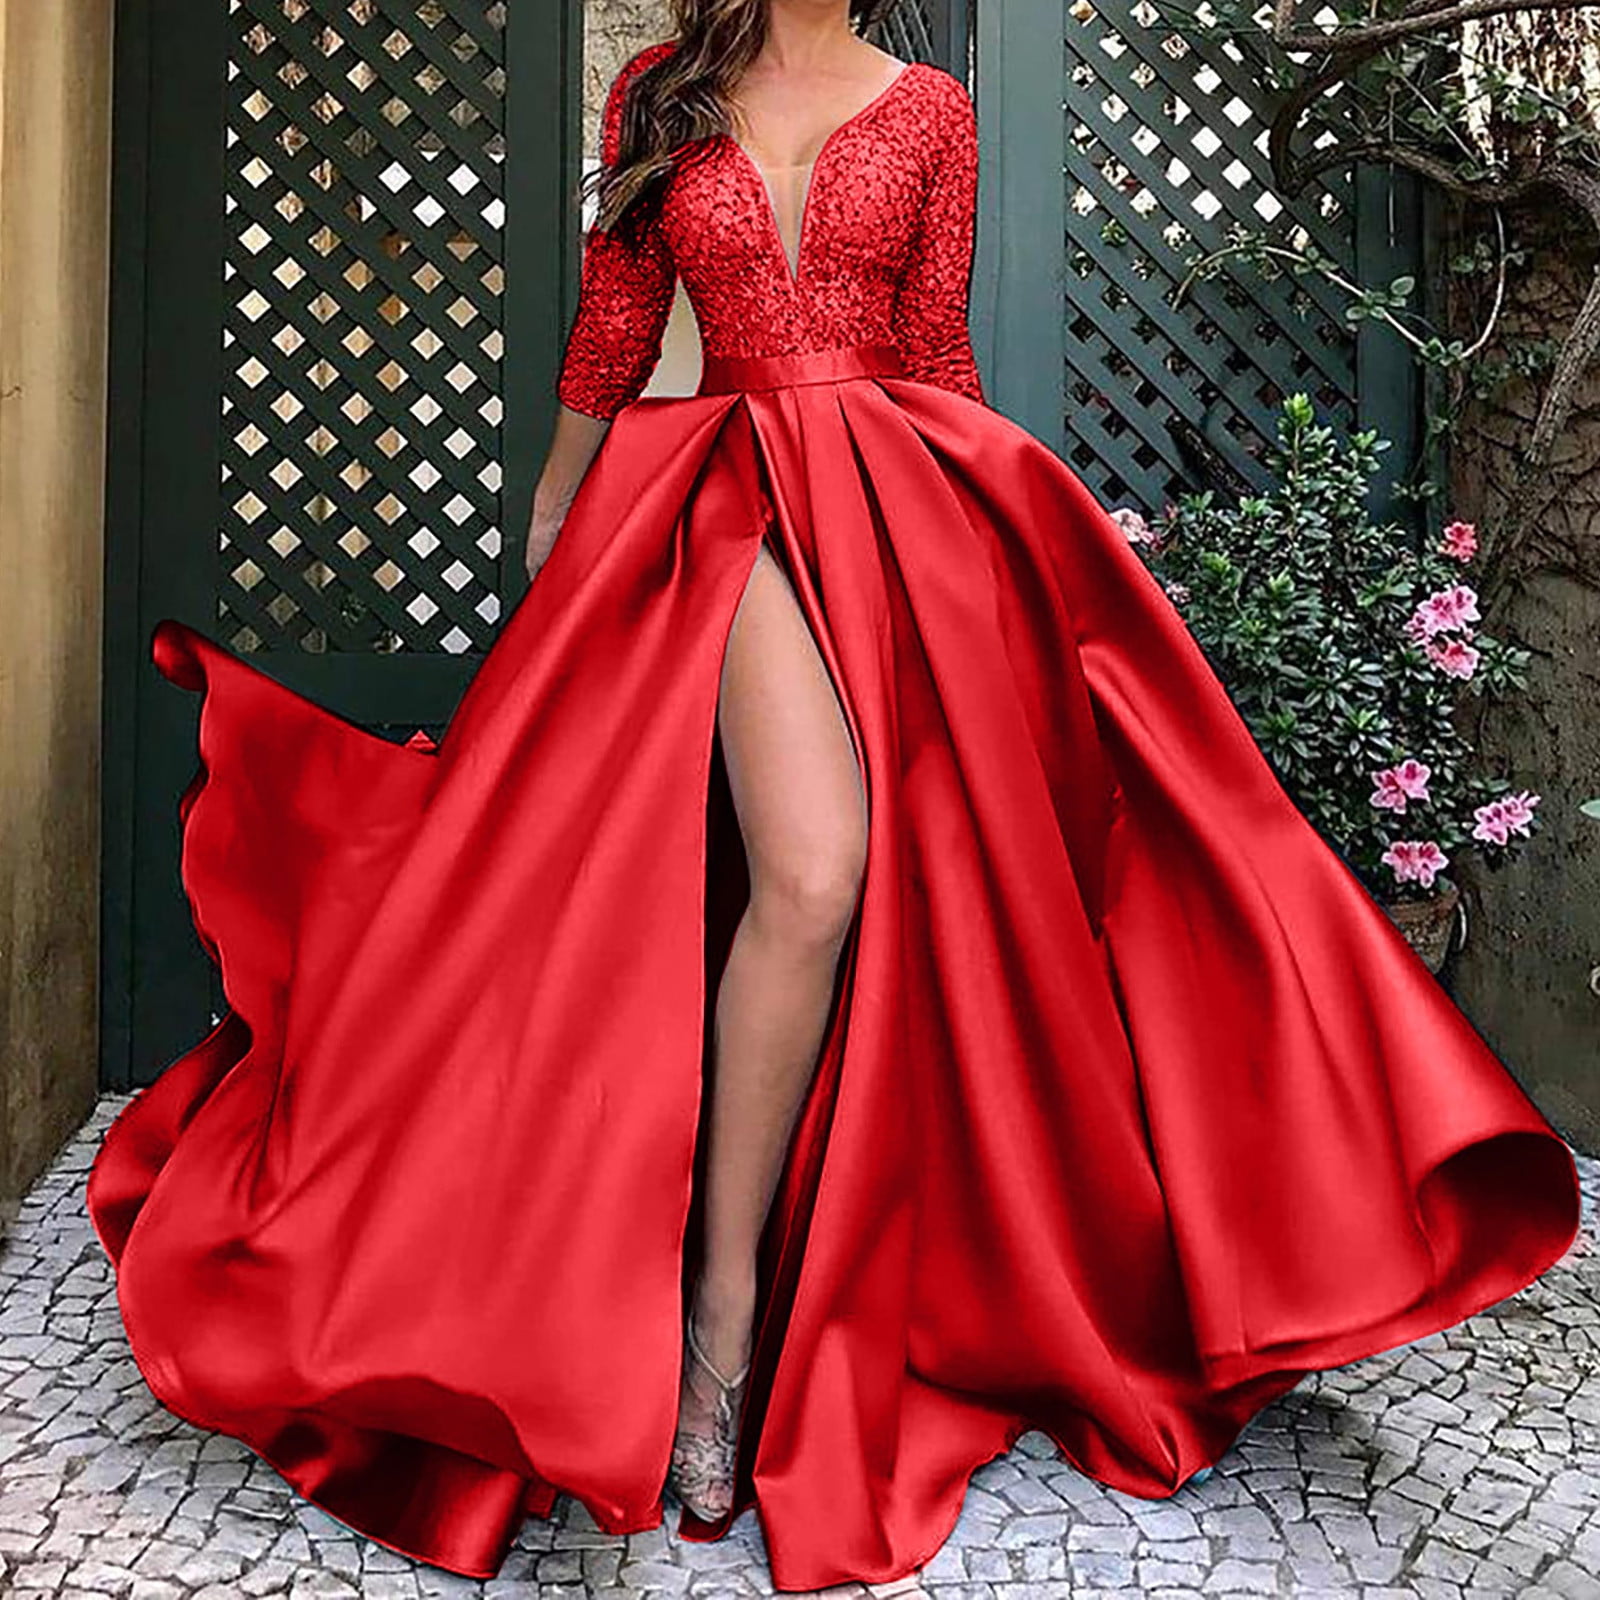 Sleeveless Satin Short Red Homecoming Gowns with Tiered Skirt –  loveangeldress